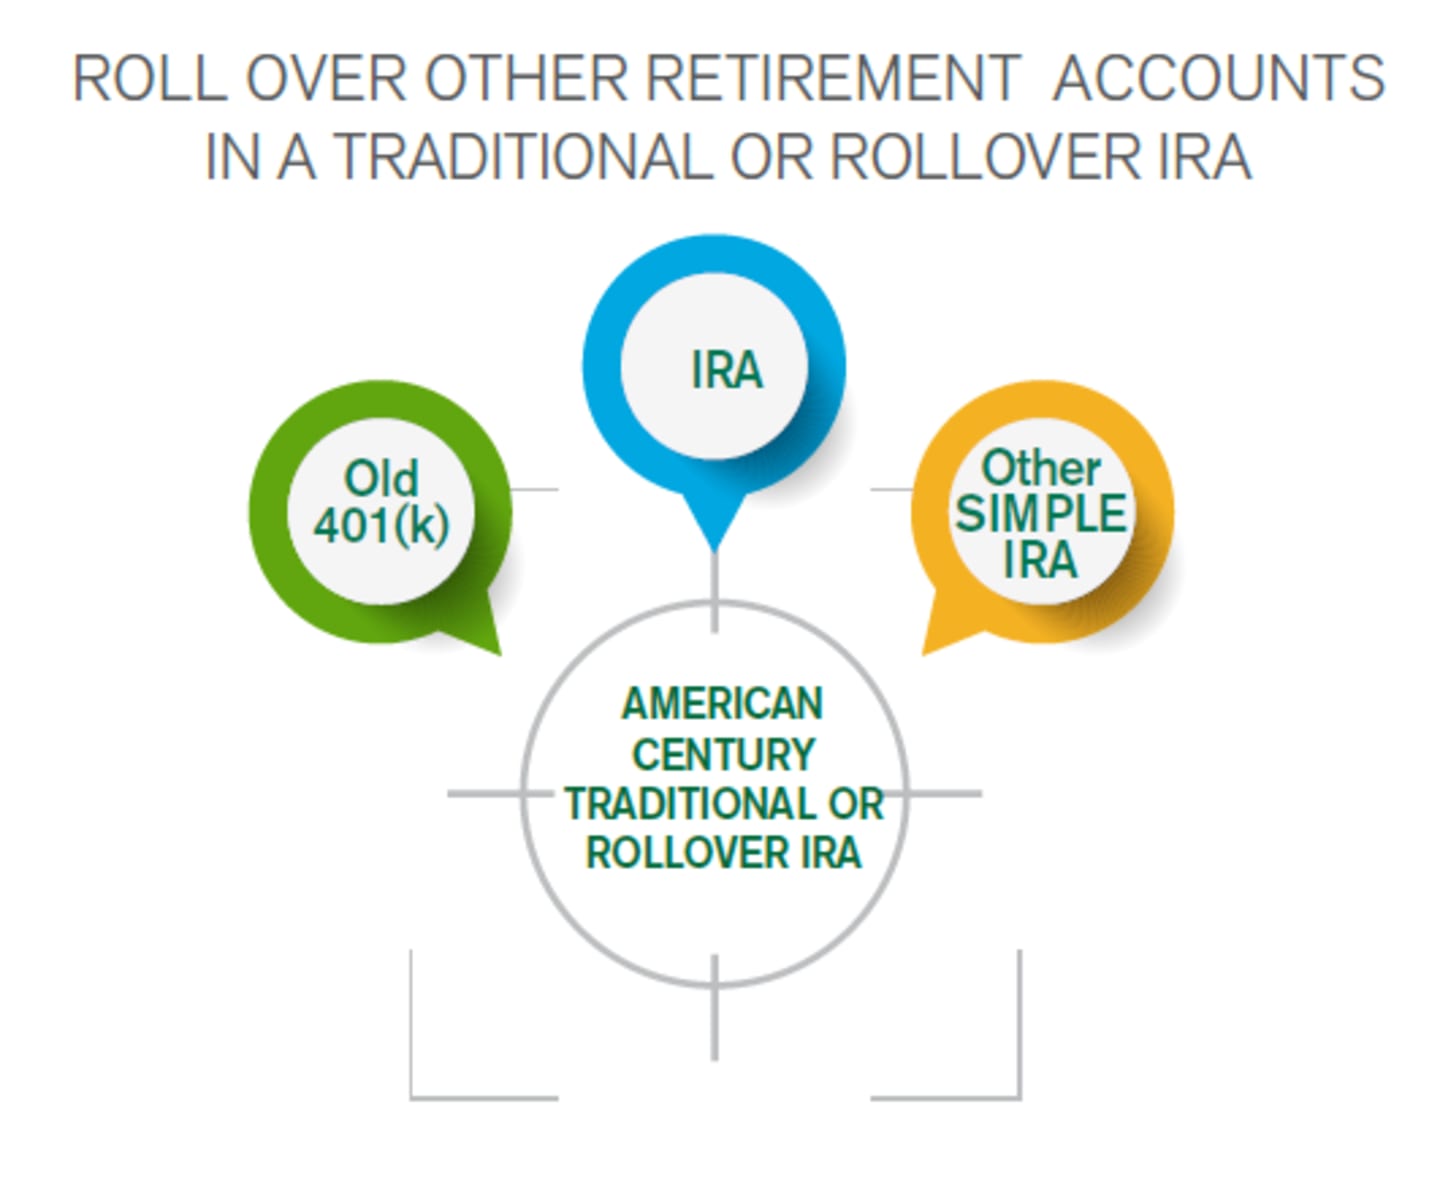 Graphic showing Old 401(k), IRA and Other SIMPLE IRA as options to rollover into an American Century Traditional or Rollover IRA.